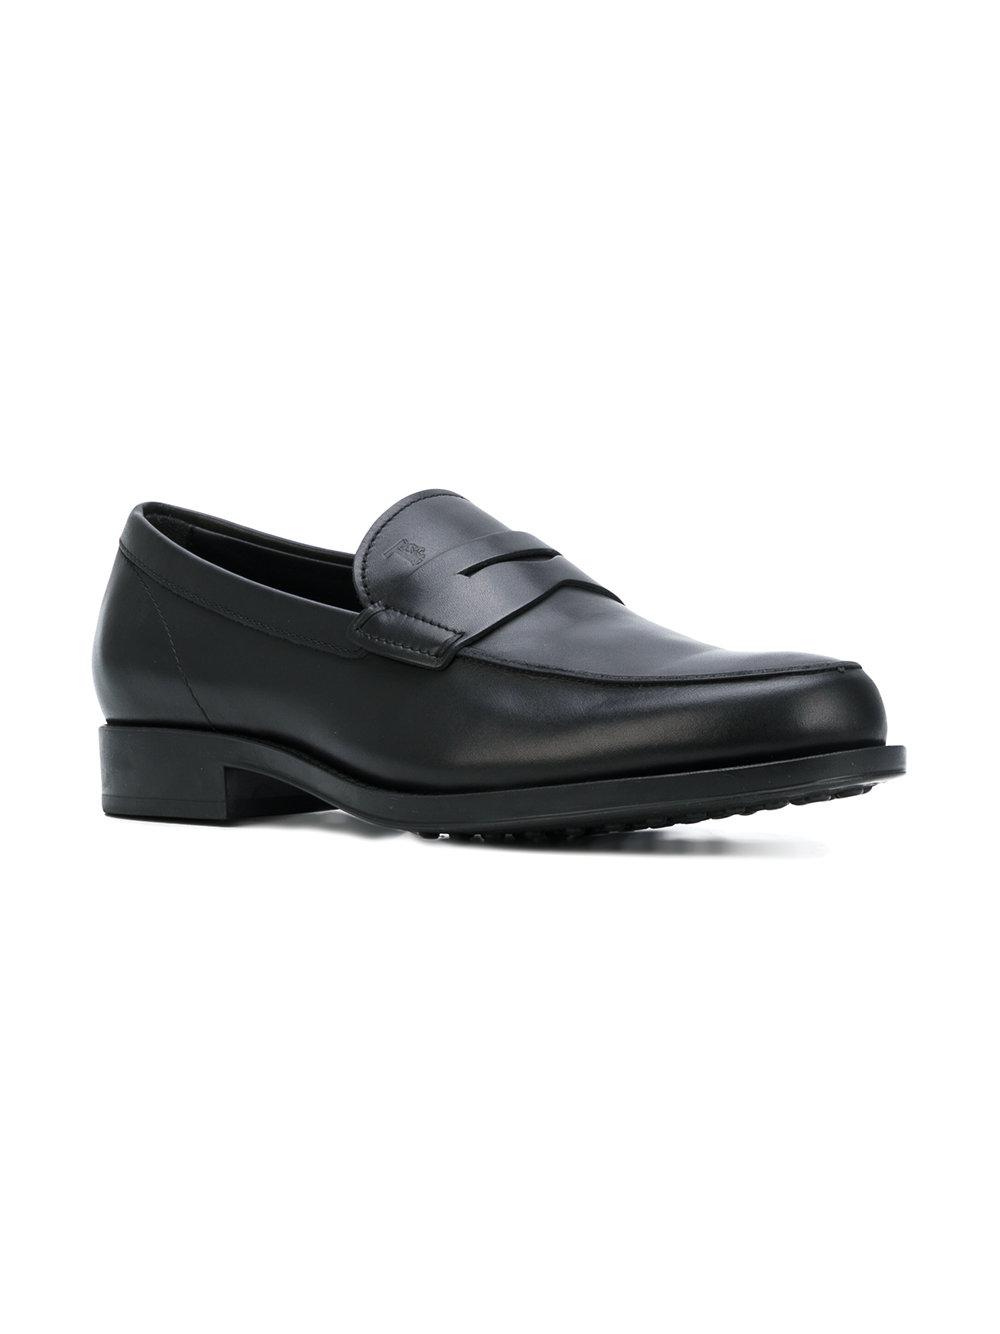 Tod's Leather Classic Loafers in Black for Men - Lyst